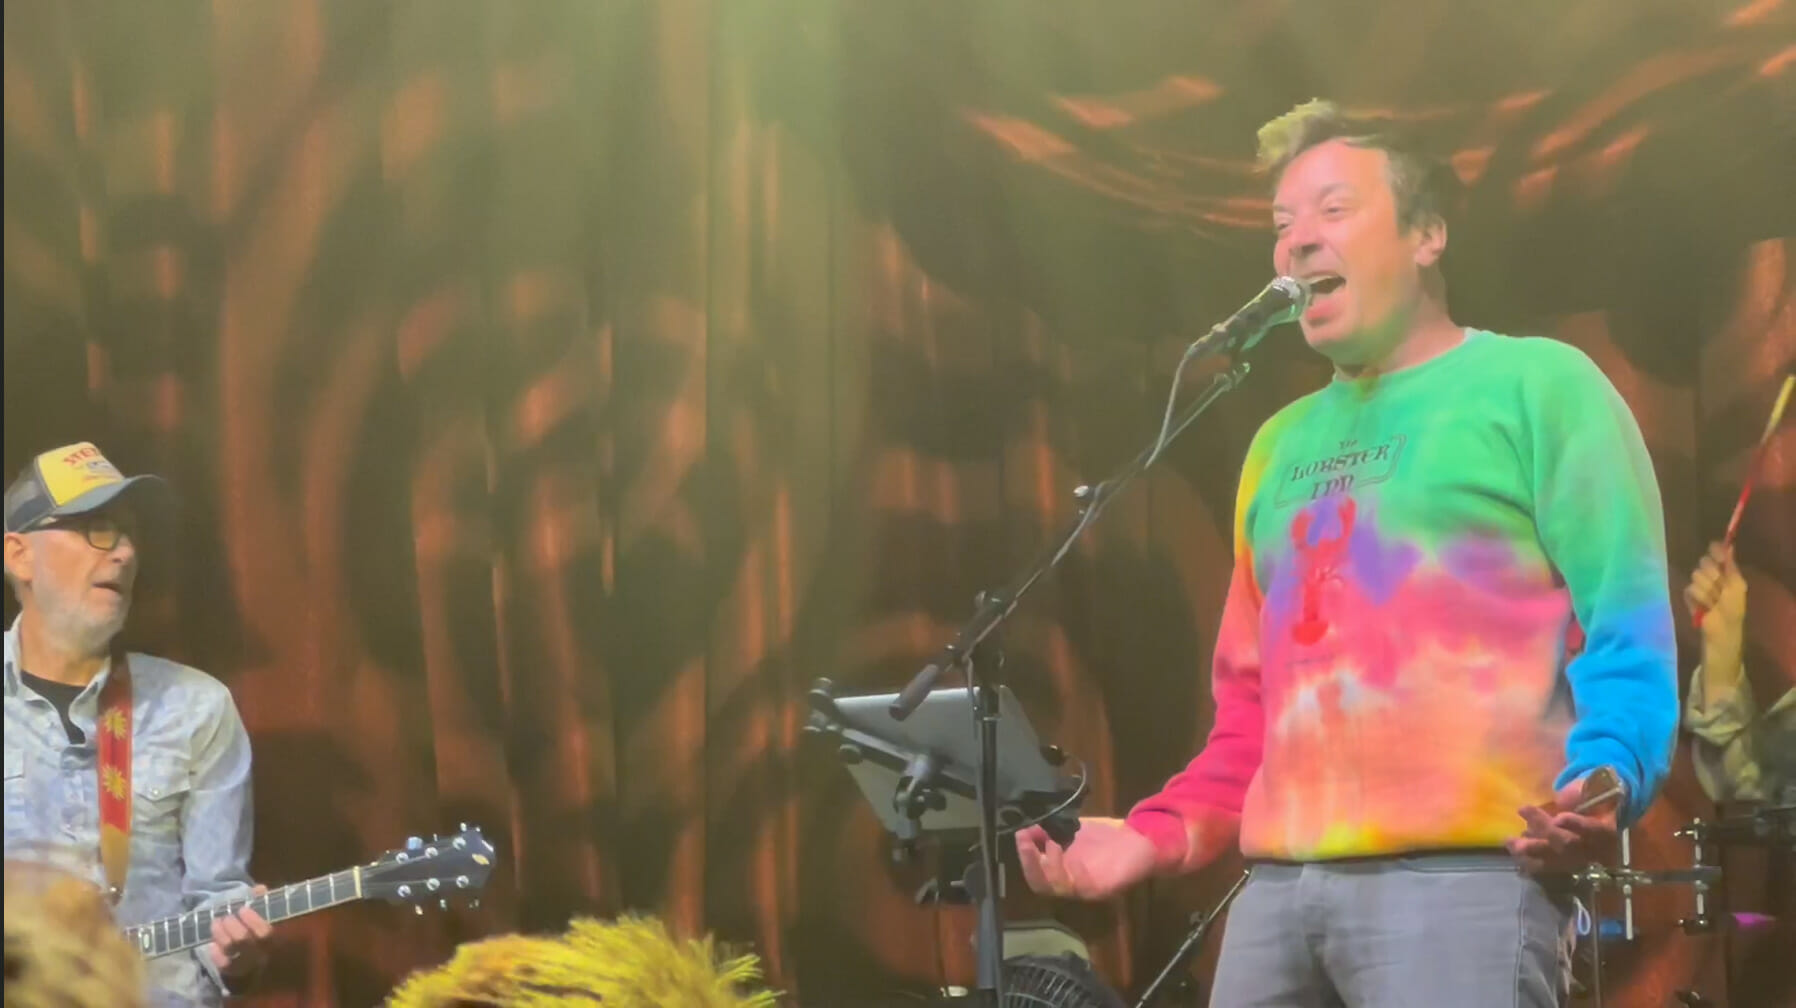 Watch: Jimmy Fallon Sings “Tennessee Jed” with The Stolen Faces at The Brooklyn Bowl Nashville